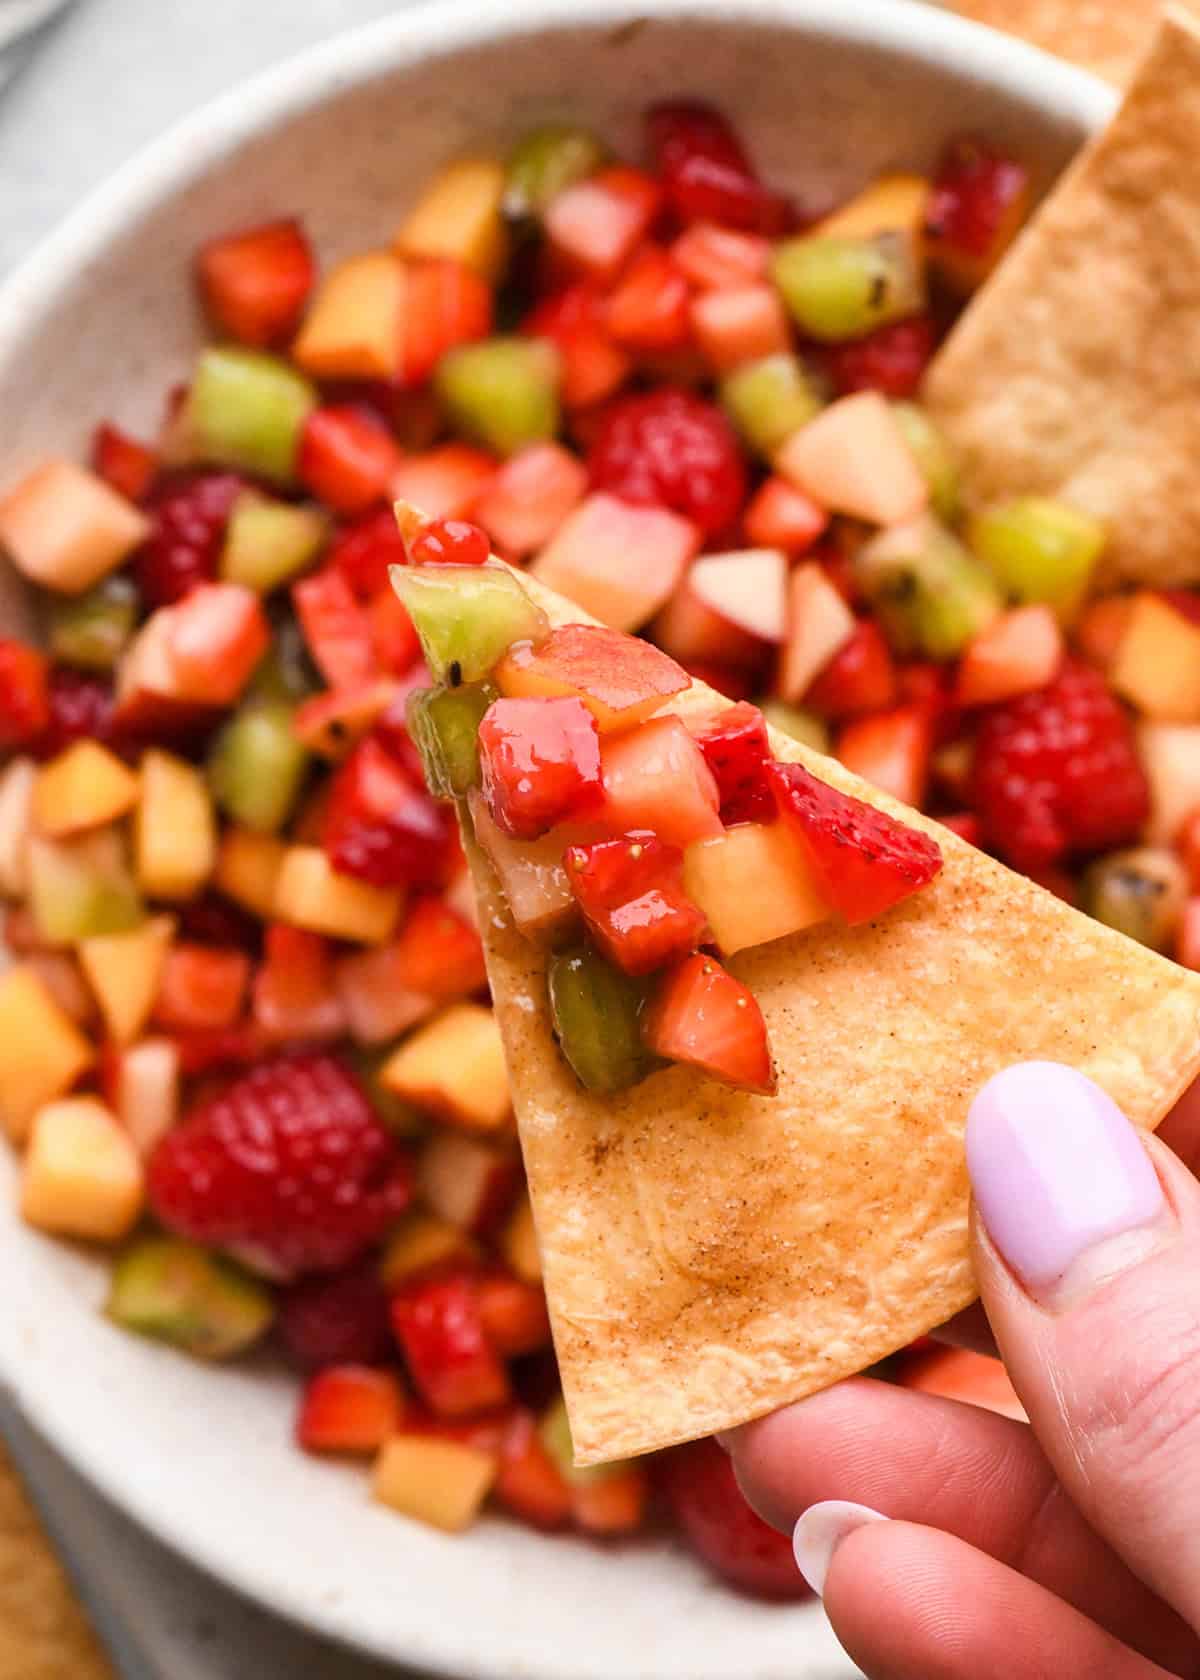 up close photo of a cinnamon chip with fruit salsa on it